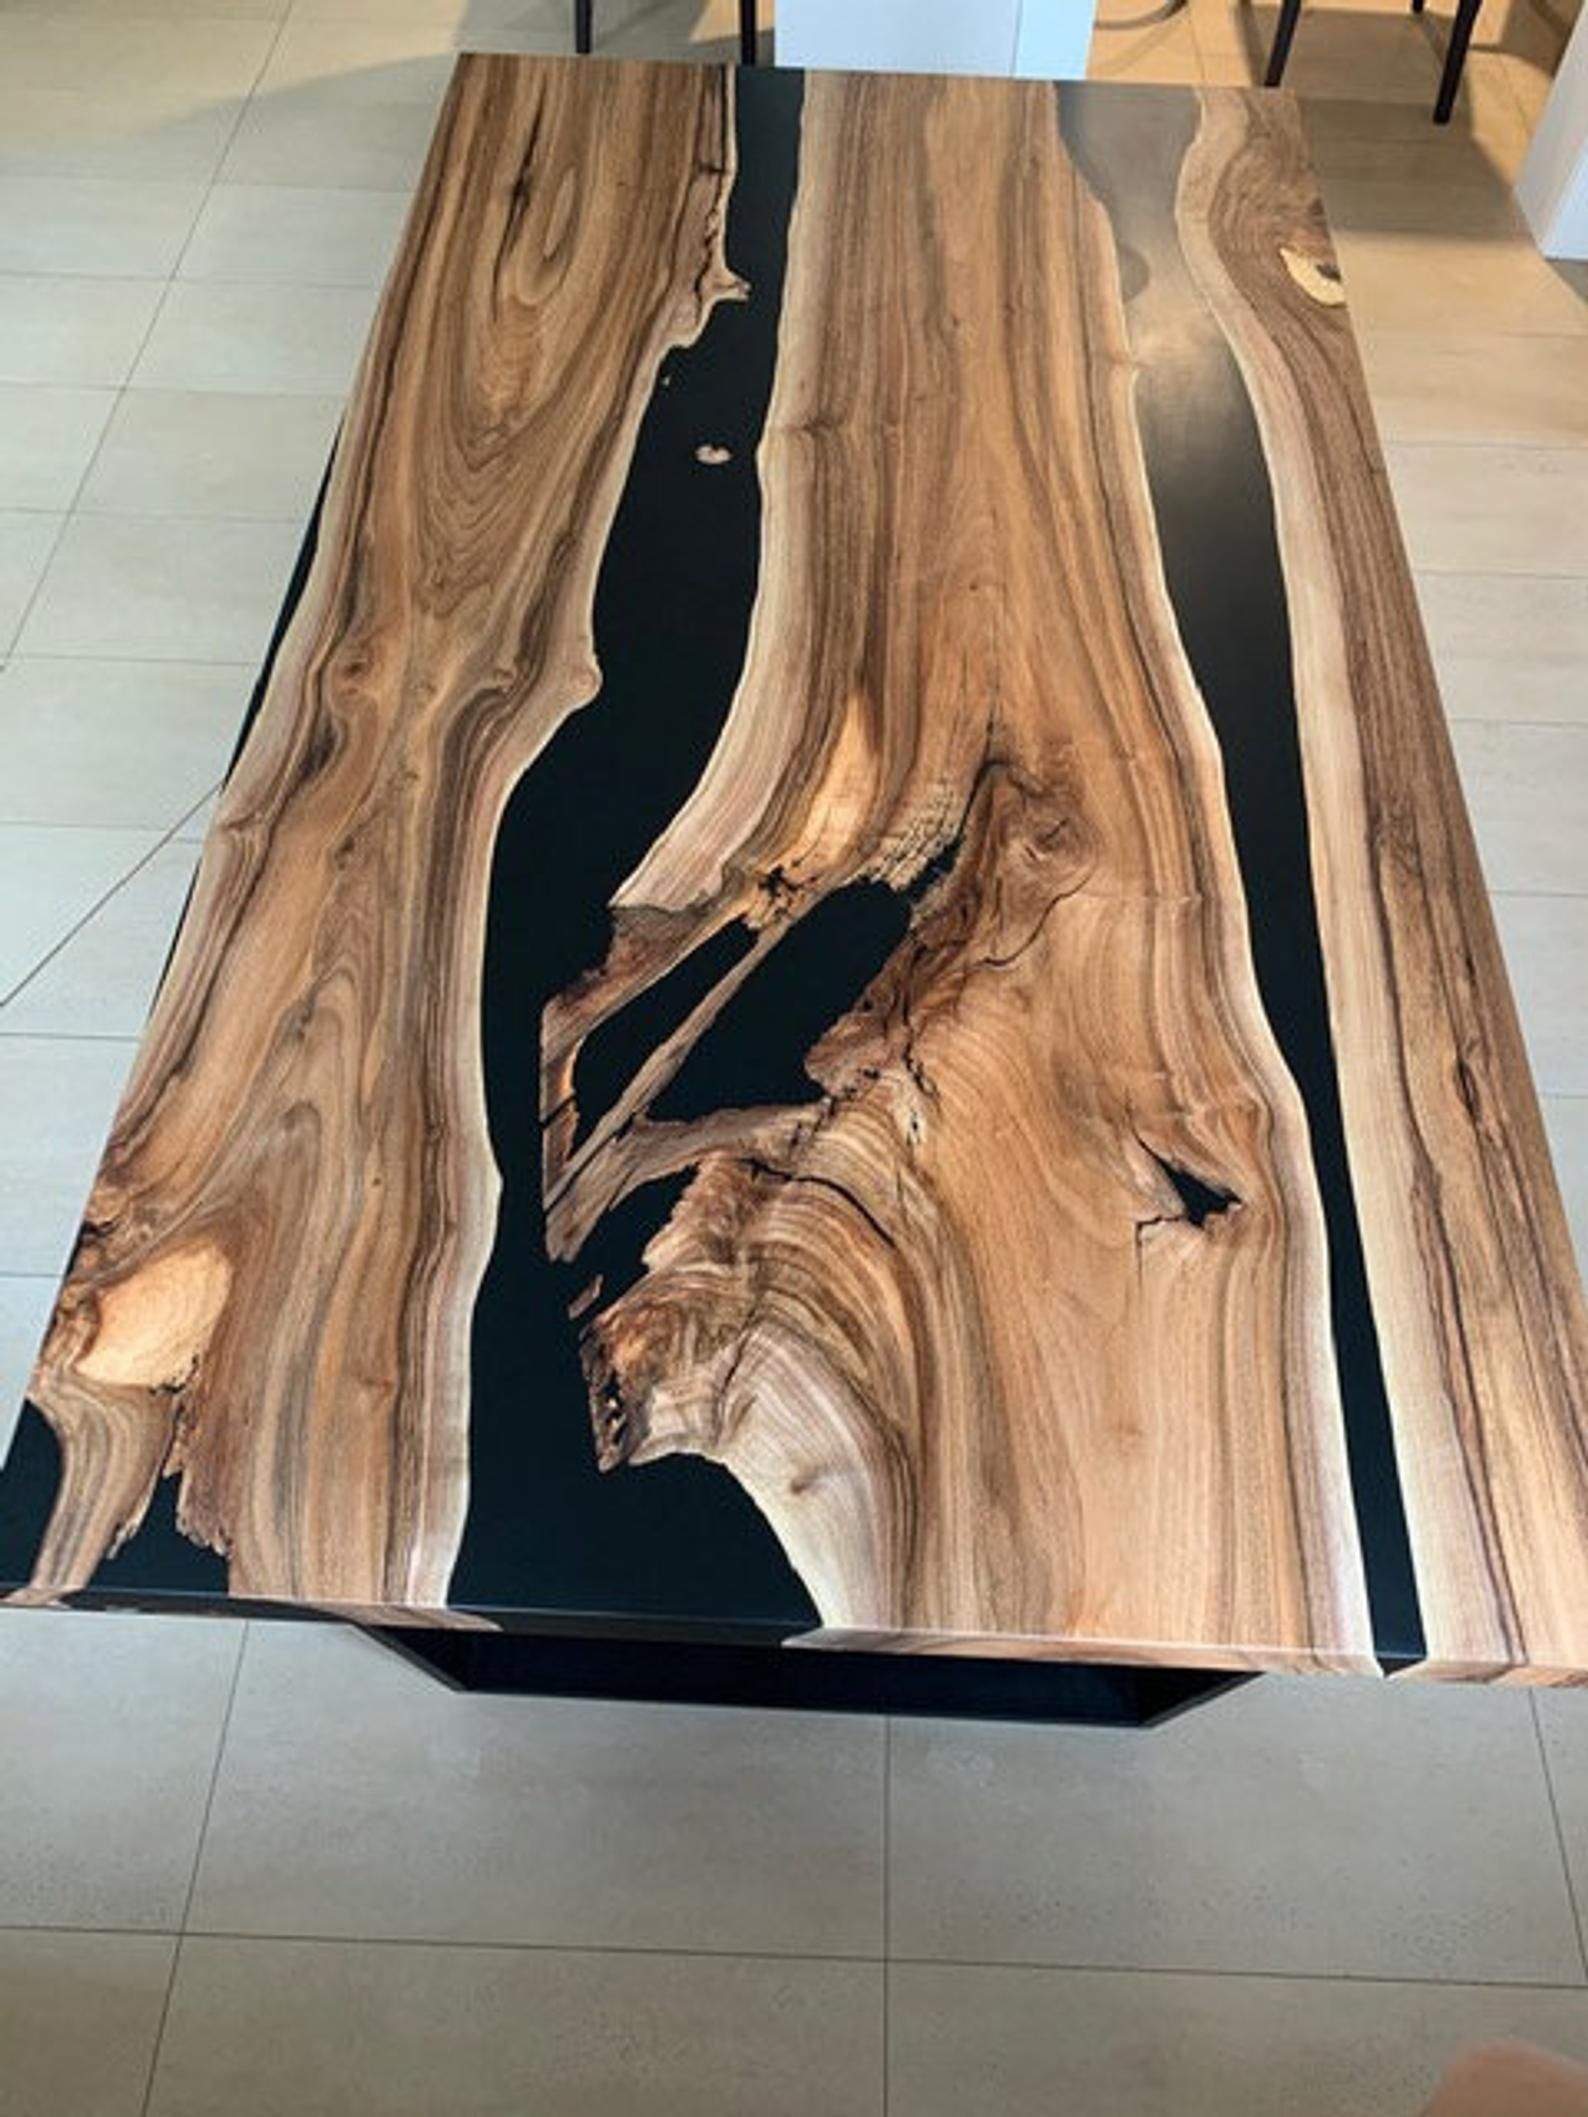 Walnut wood and epoxy resin dining table - Walnut wood and epoxy resin dining table -   19 diy Table epoxy ideas